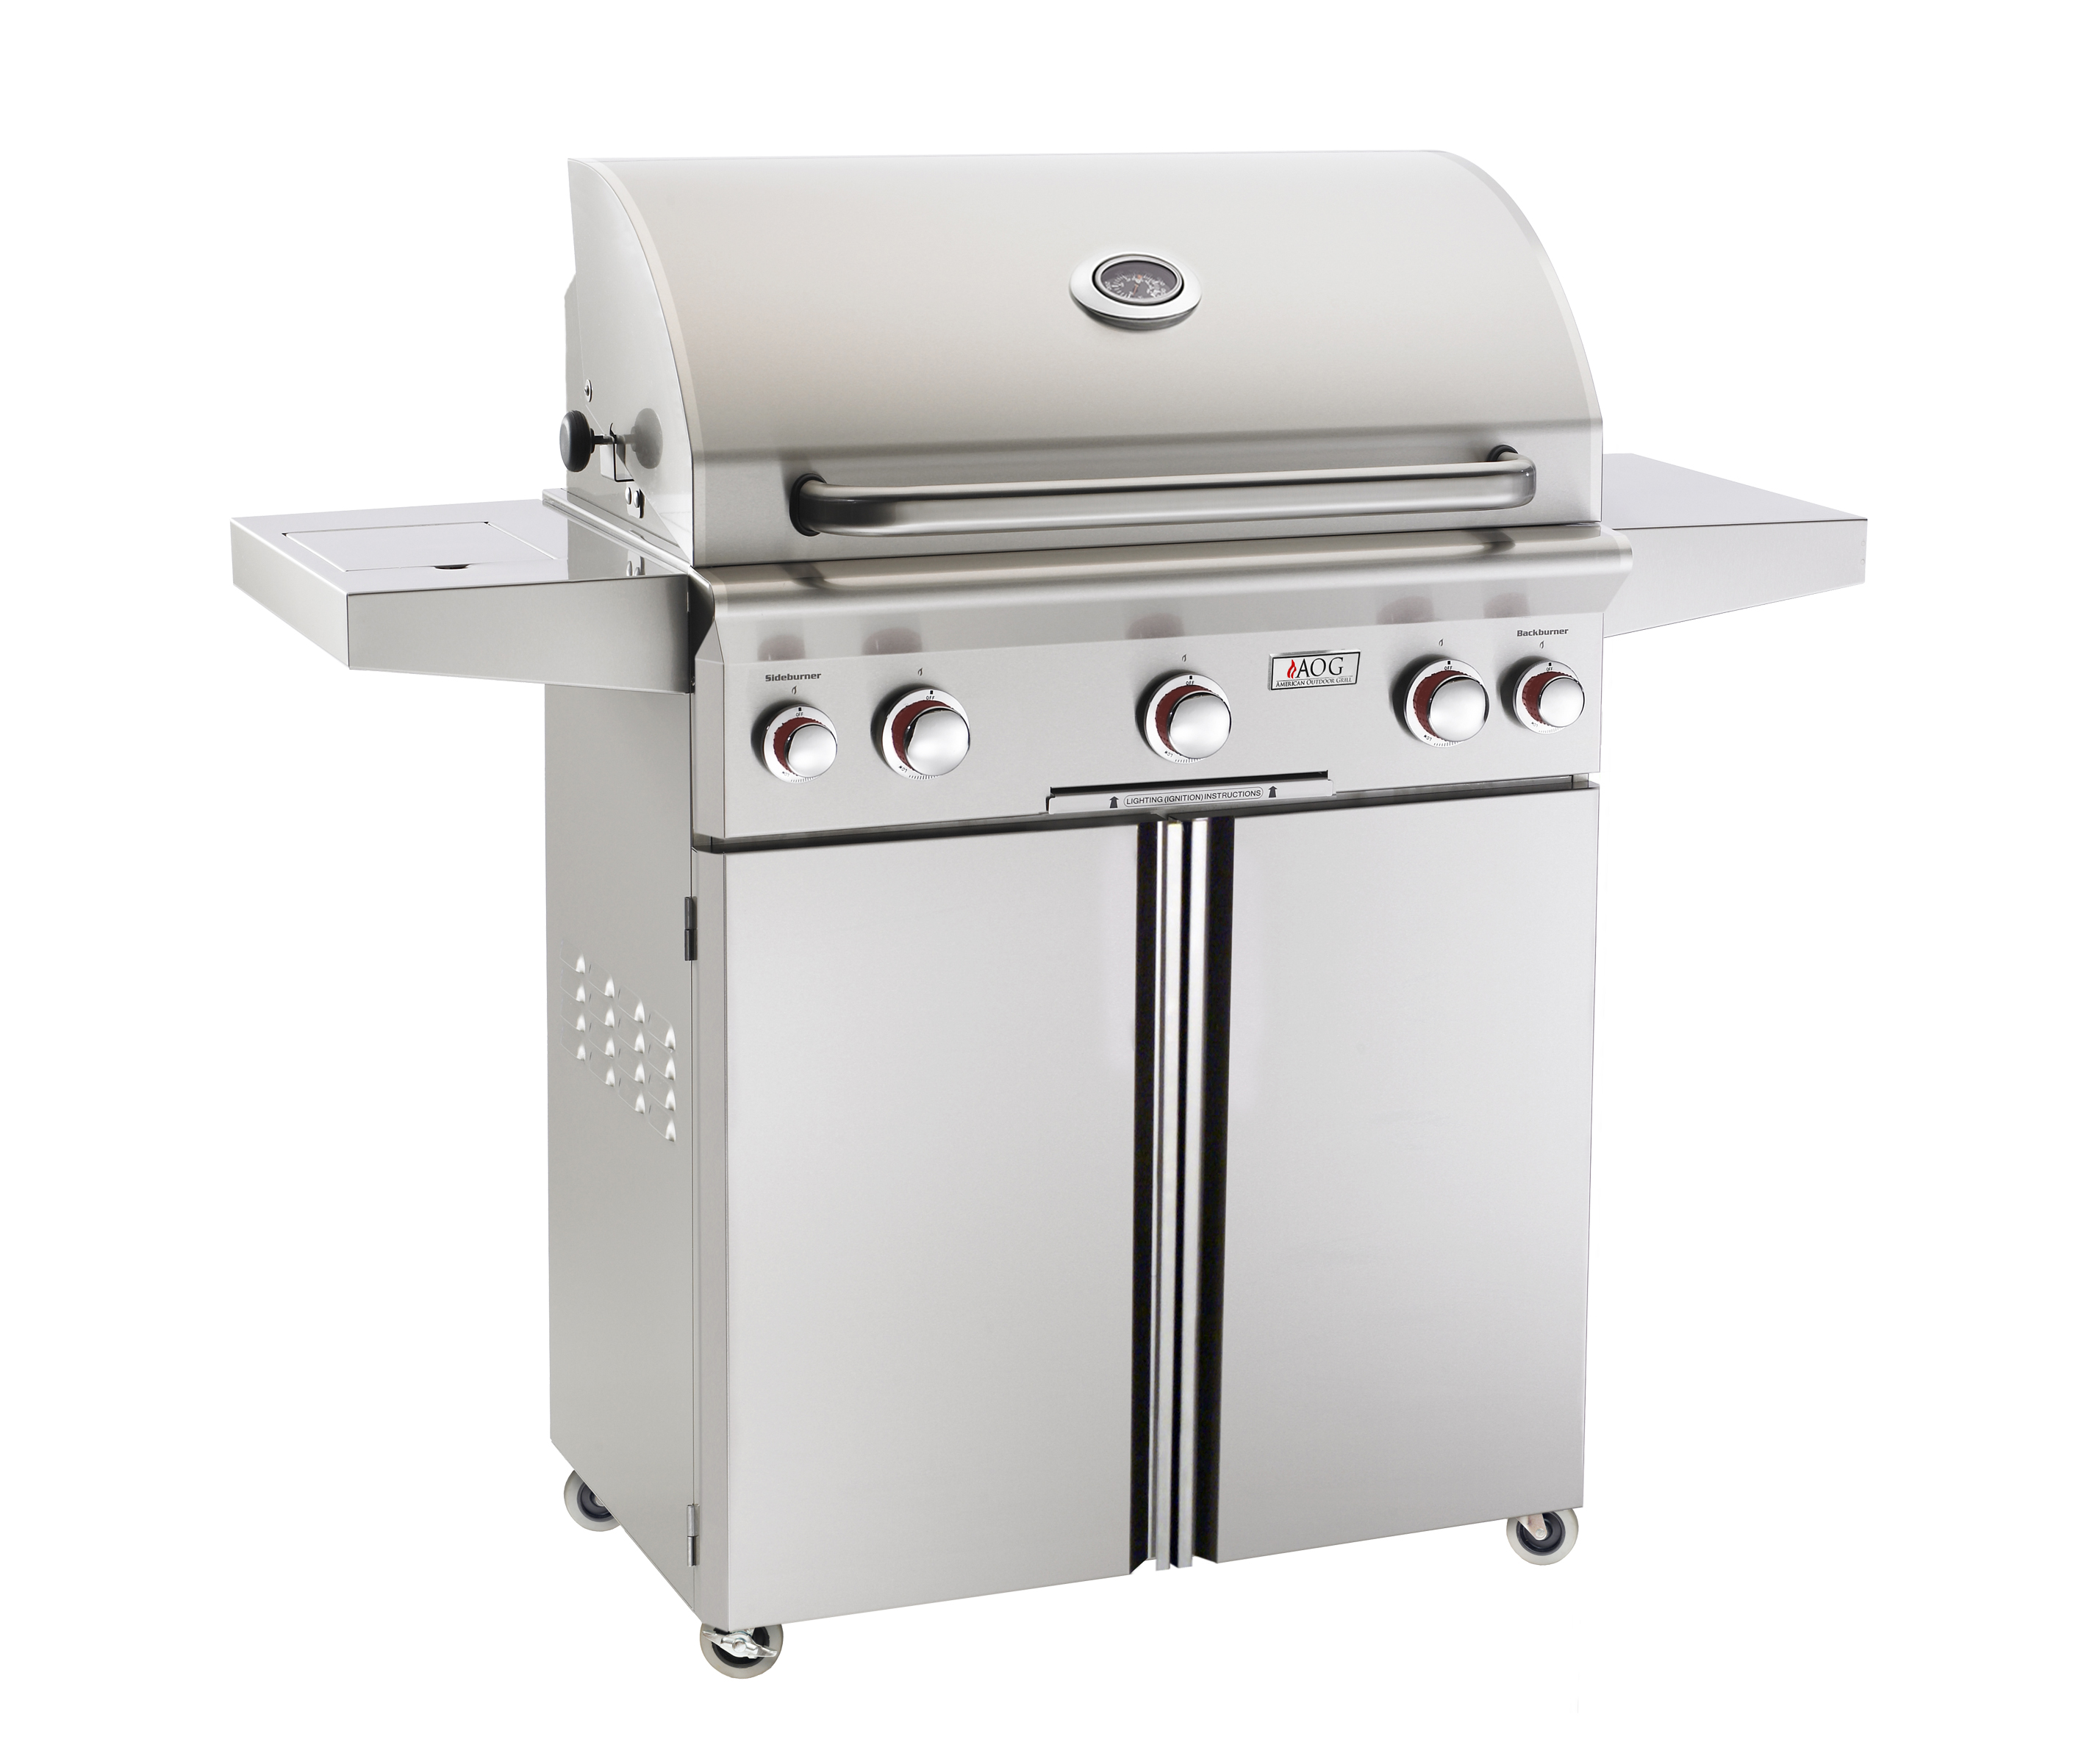 aog-30pct-30-t-series-portable-grill-closed.jpg